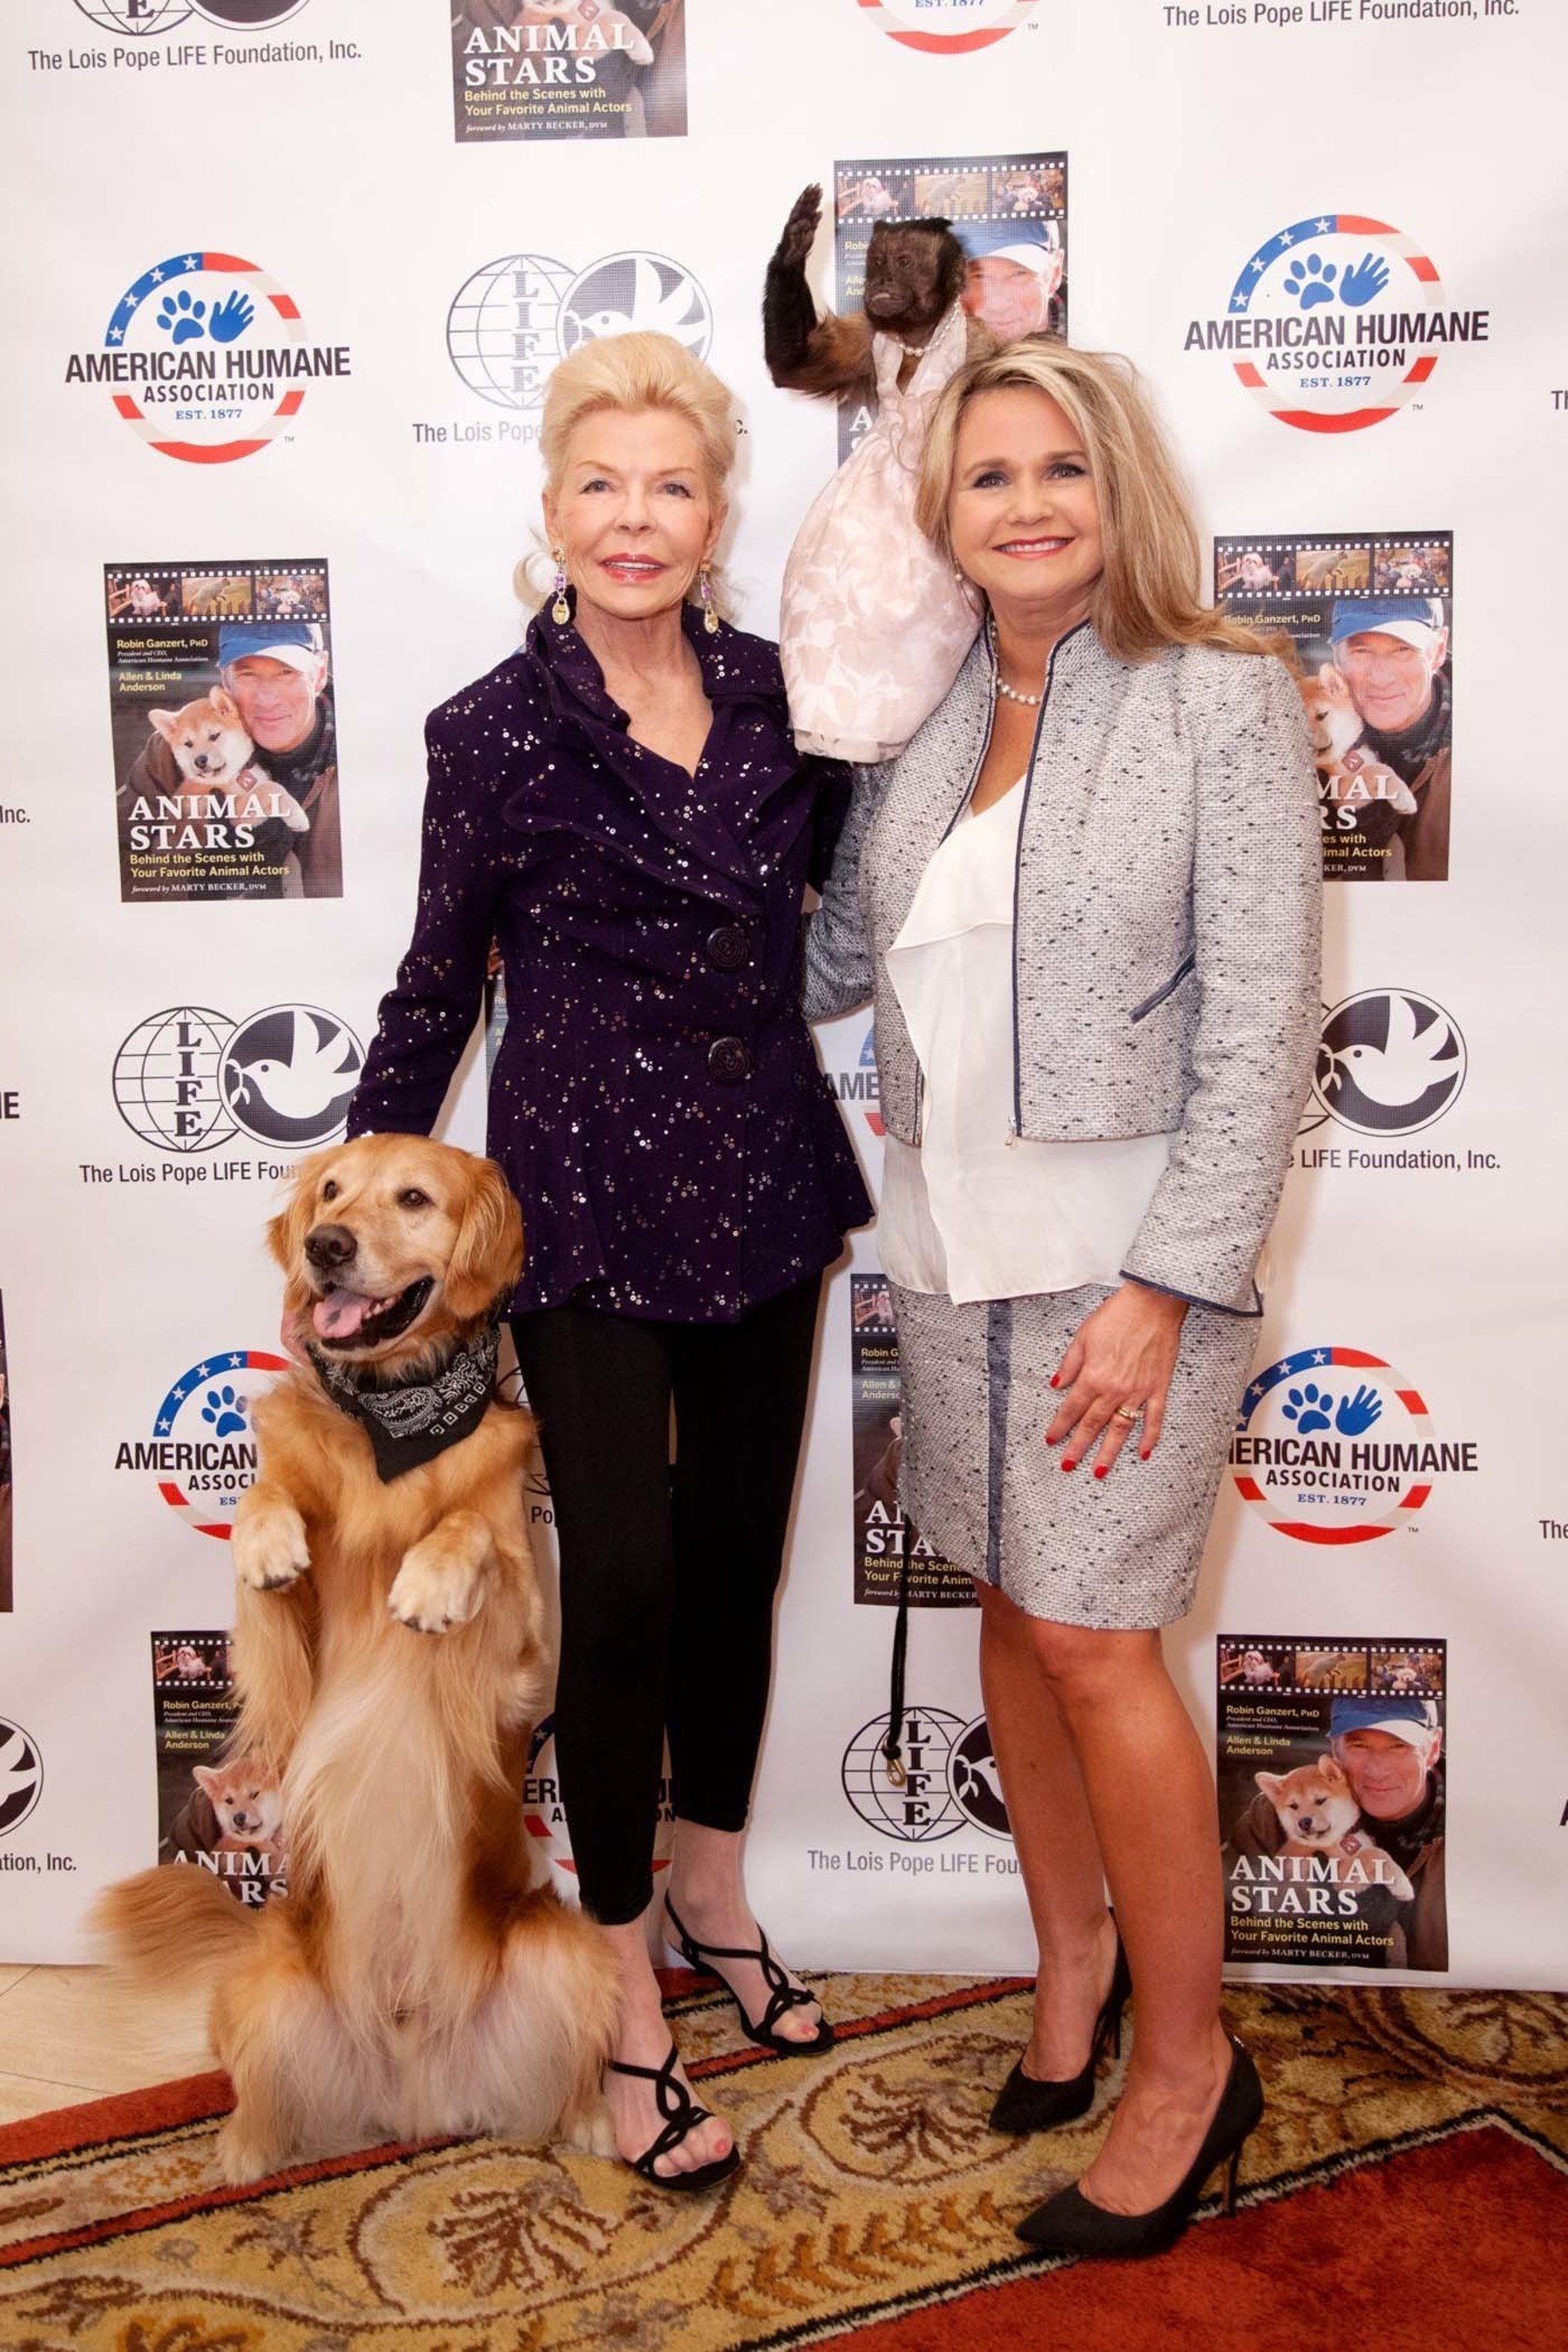 Philanthropist Lois Pope (left) and American Humane Association president and CEO Dr. Robin Ganzert pose with animal actors Hudson the Golden Retriever and Crystal the Capuchin at American Humane Association's "Afternoon Tea with Animal Stars" event sponsored by Mrs. Pope in Palm Beach, Florida on Thursday January 22nd.Crystal and Hudson were the two featured guests at the inspiring event, educating a crowd of animal and movie lovers alike about the hard work of animal actors and their trainers and what it takes to protect them on set.